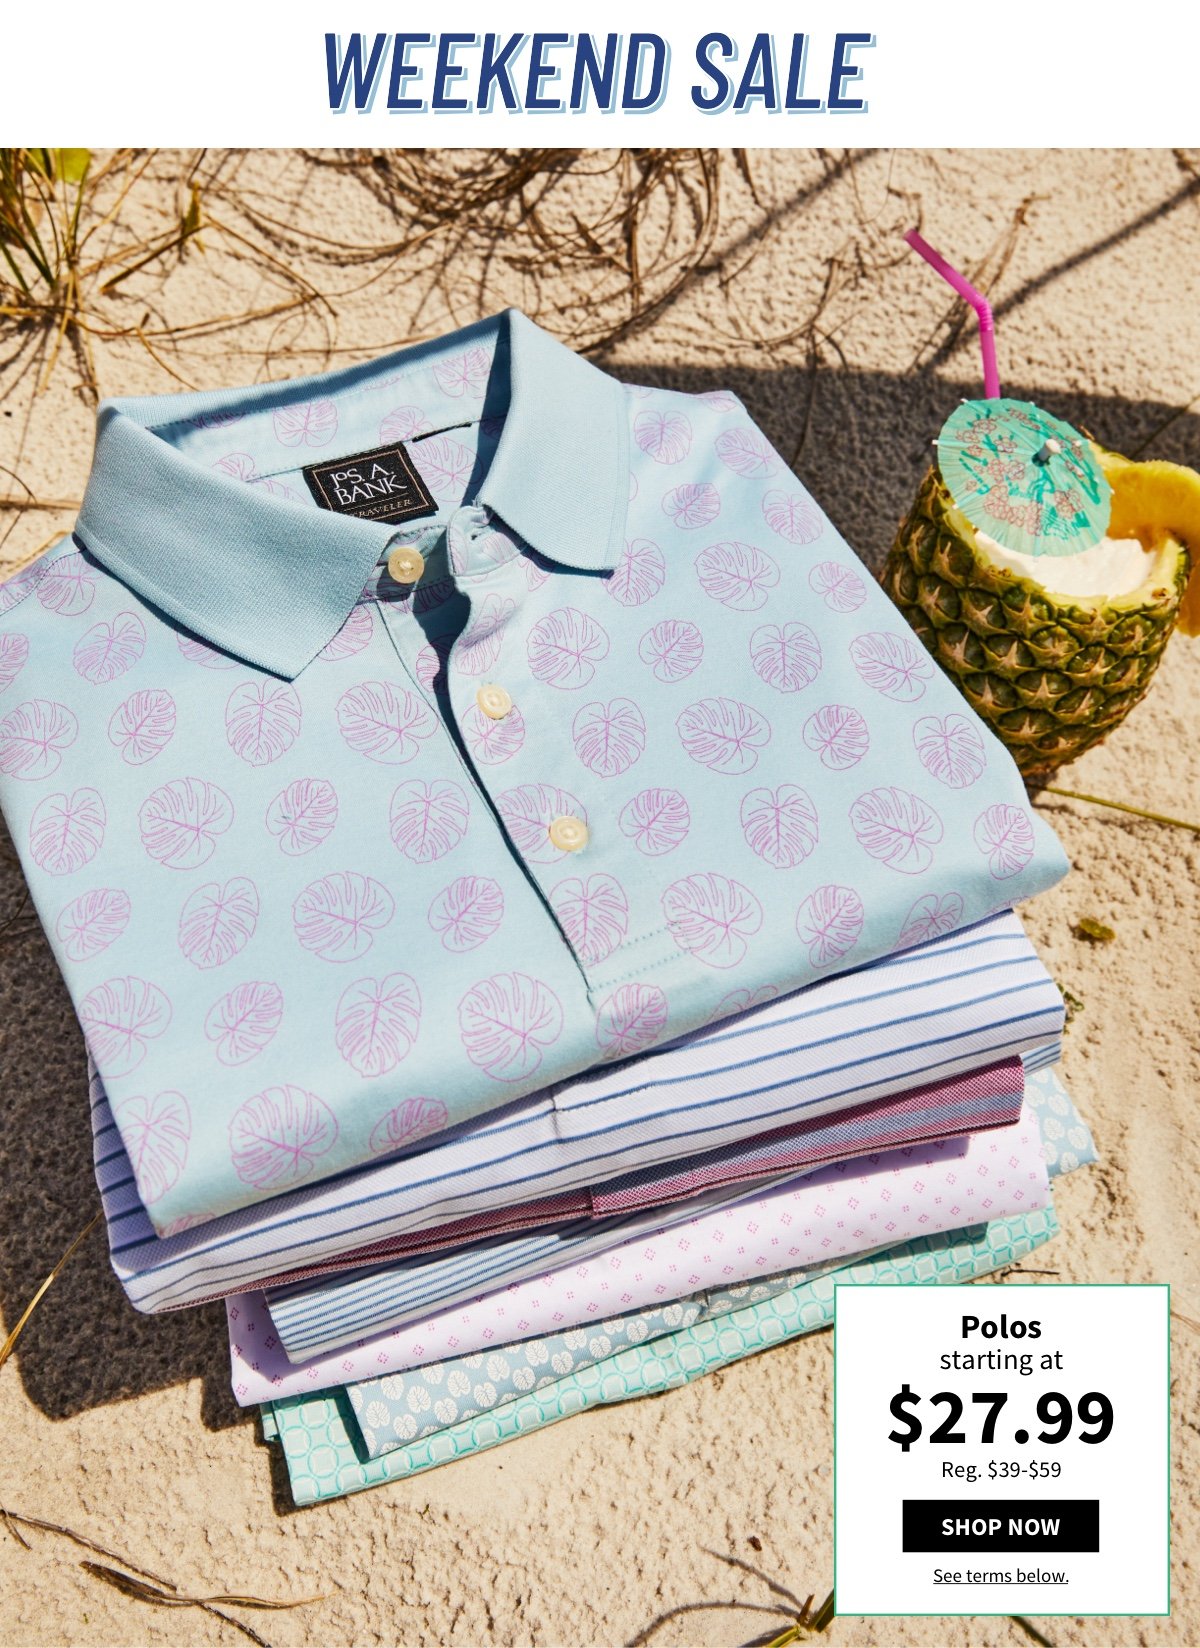 Shop Polos starting at $27.99 during our Weekend Sale